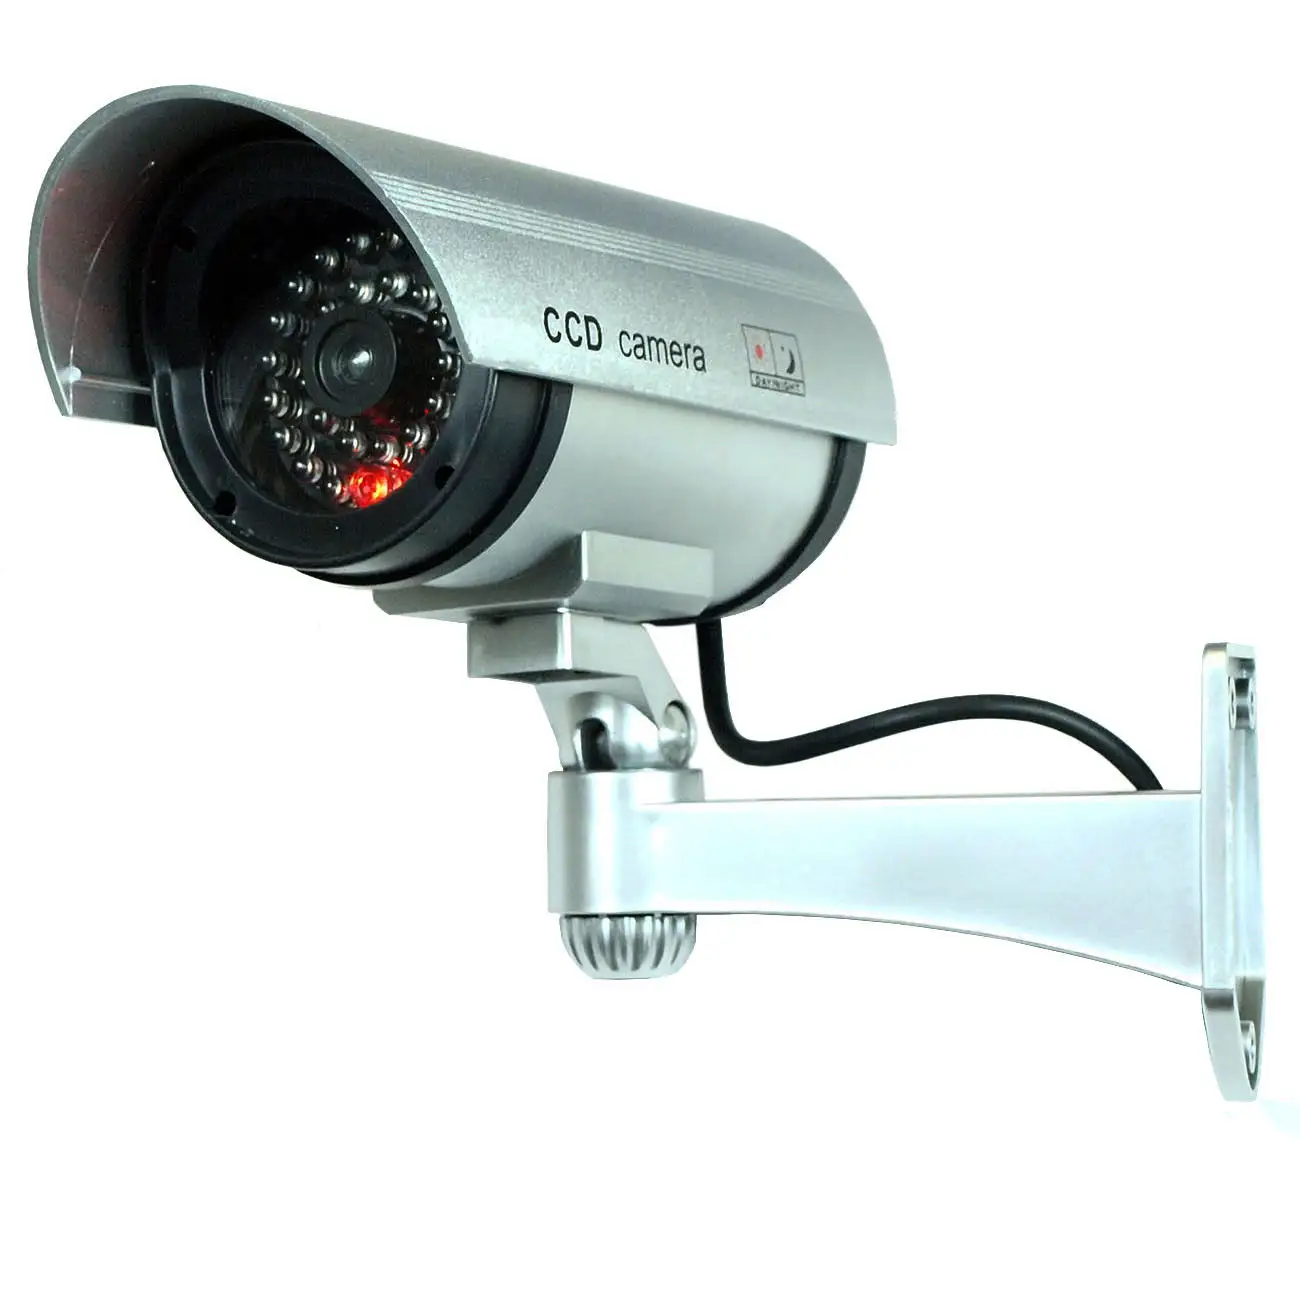 Night Cctv Surveillance System Flashing Red Light Dummy Security Camera With Realistic Look Recording Leds